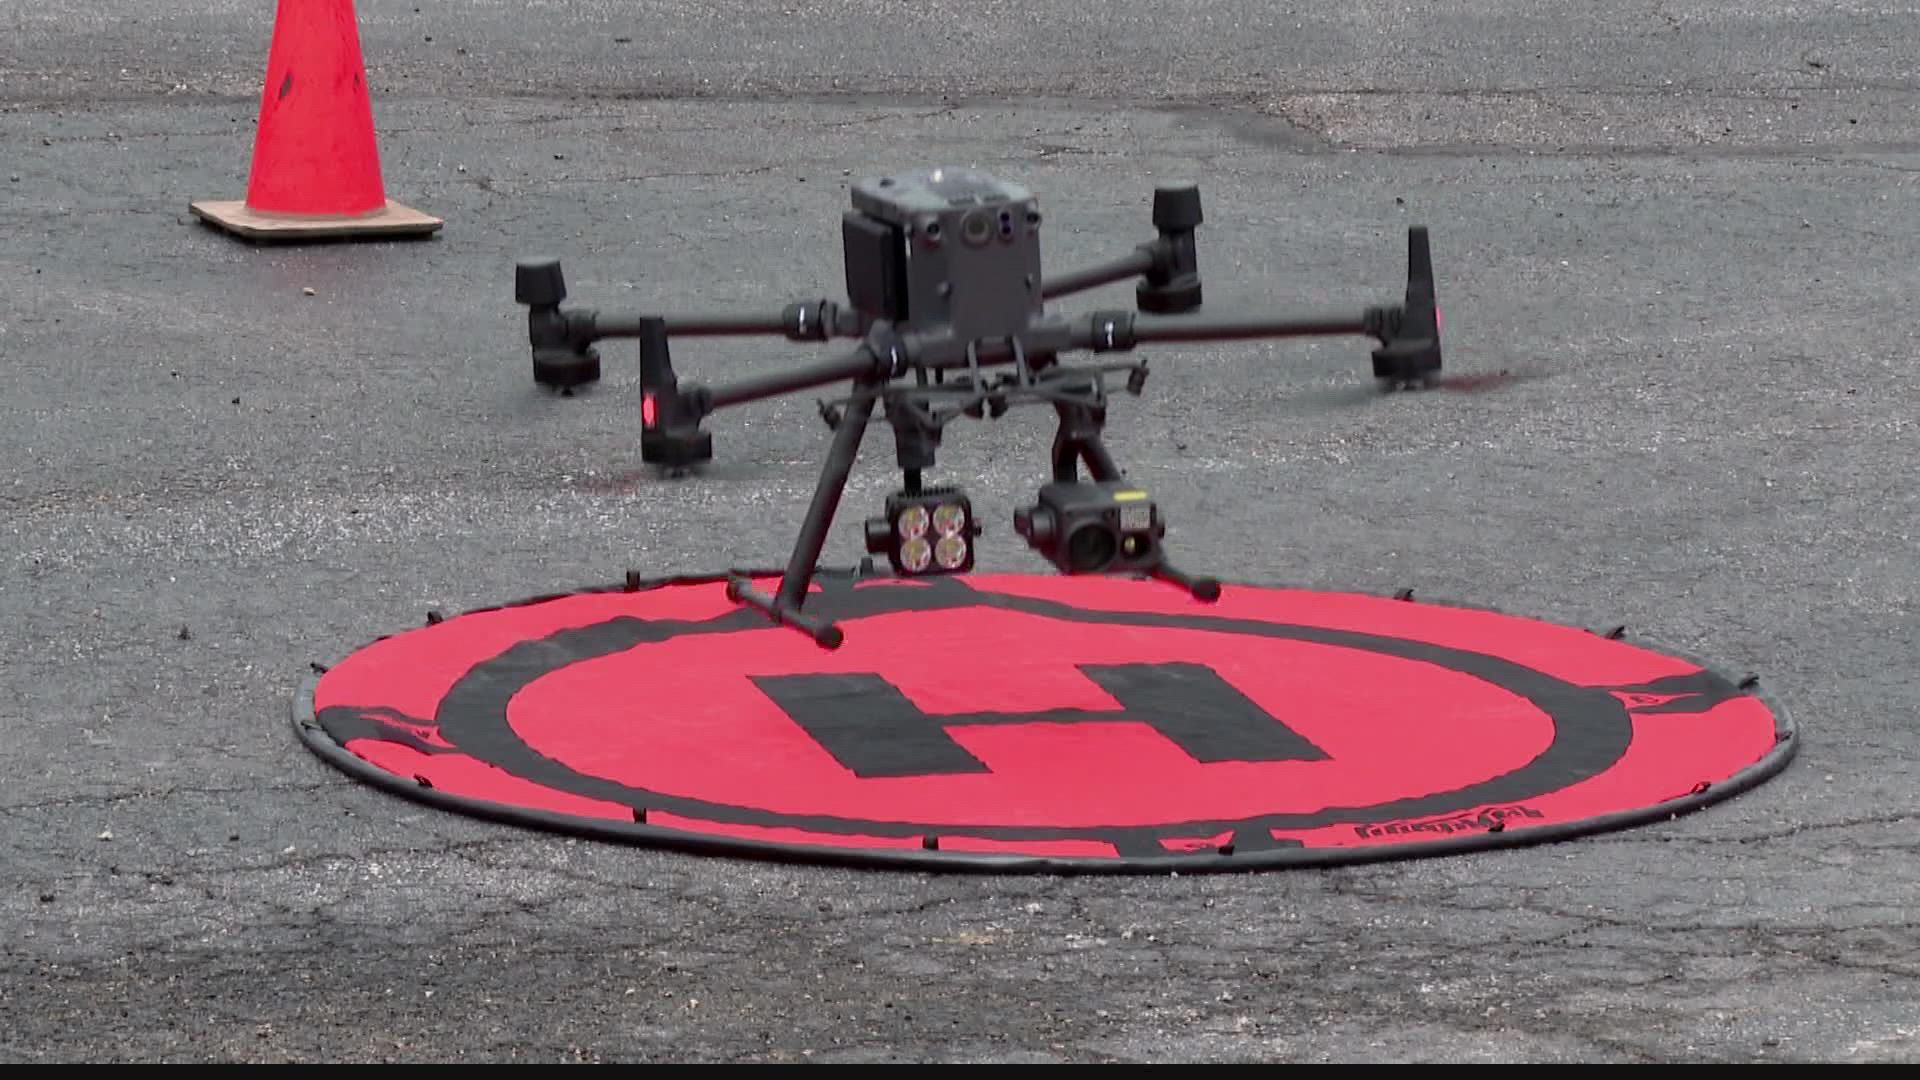 A high-tech drone gives firefighters a view from above to fight fires and search for victims in other emergencies.